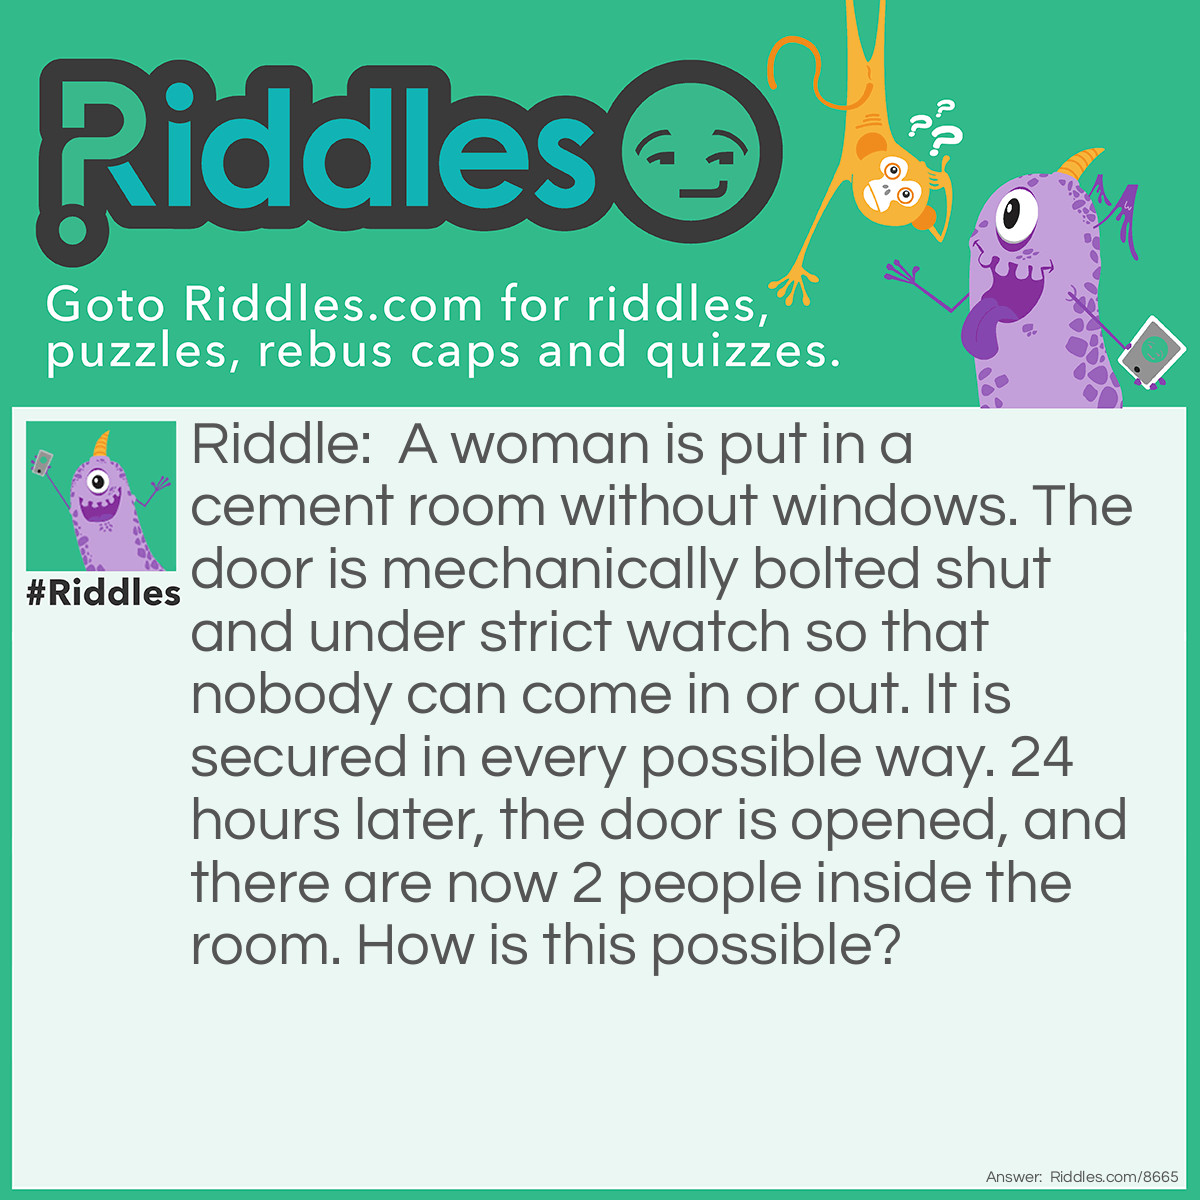 Riddle: A woman is put in a cement room without windows. The door is mechanically bolted shut and under strict watch so that nobody can come in or out. It is secured in every possible way. 24 hours later, the door is opened, and there are now 2 people inside the room. How is this possible? Answer: The woman was pregnant.